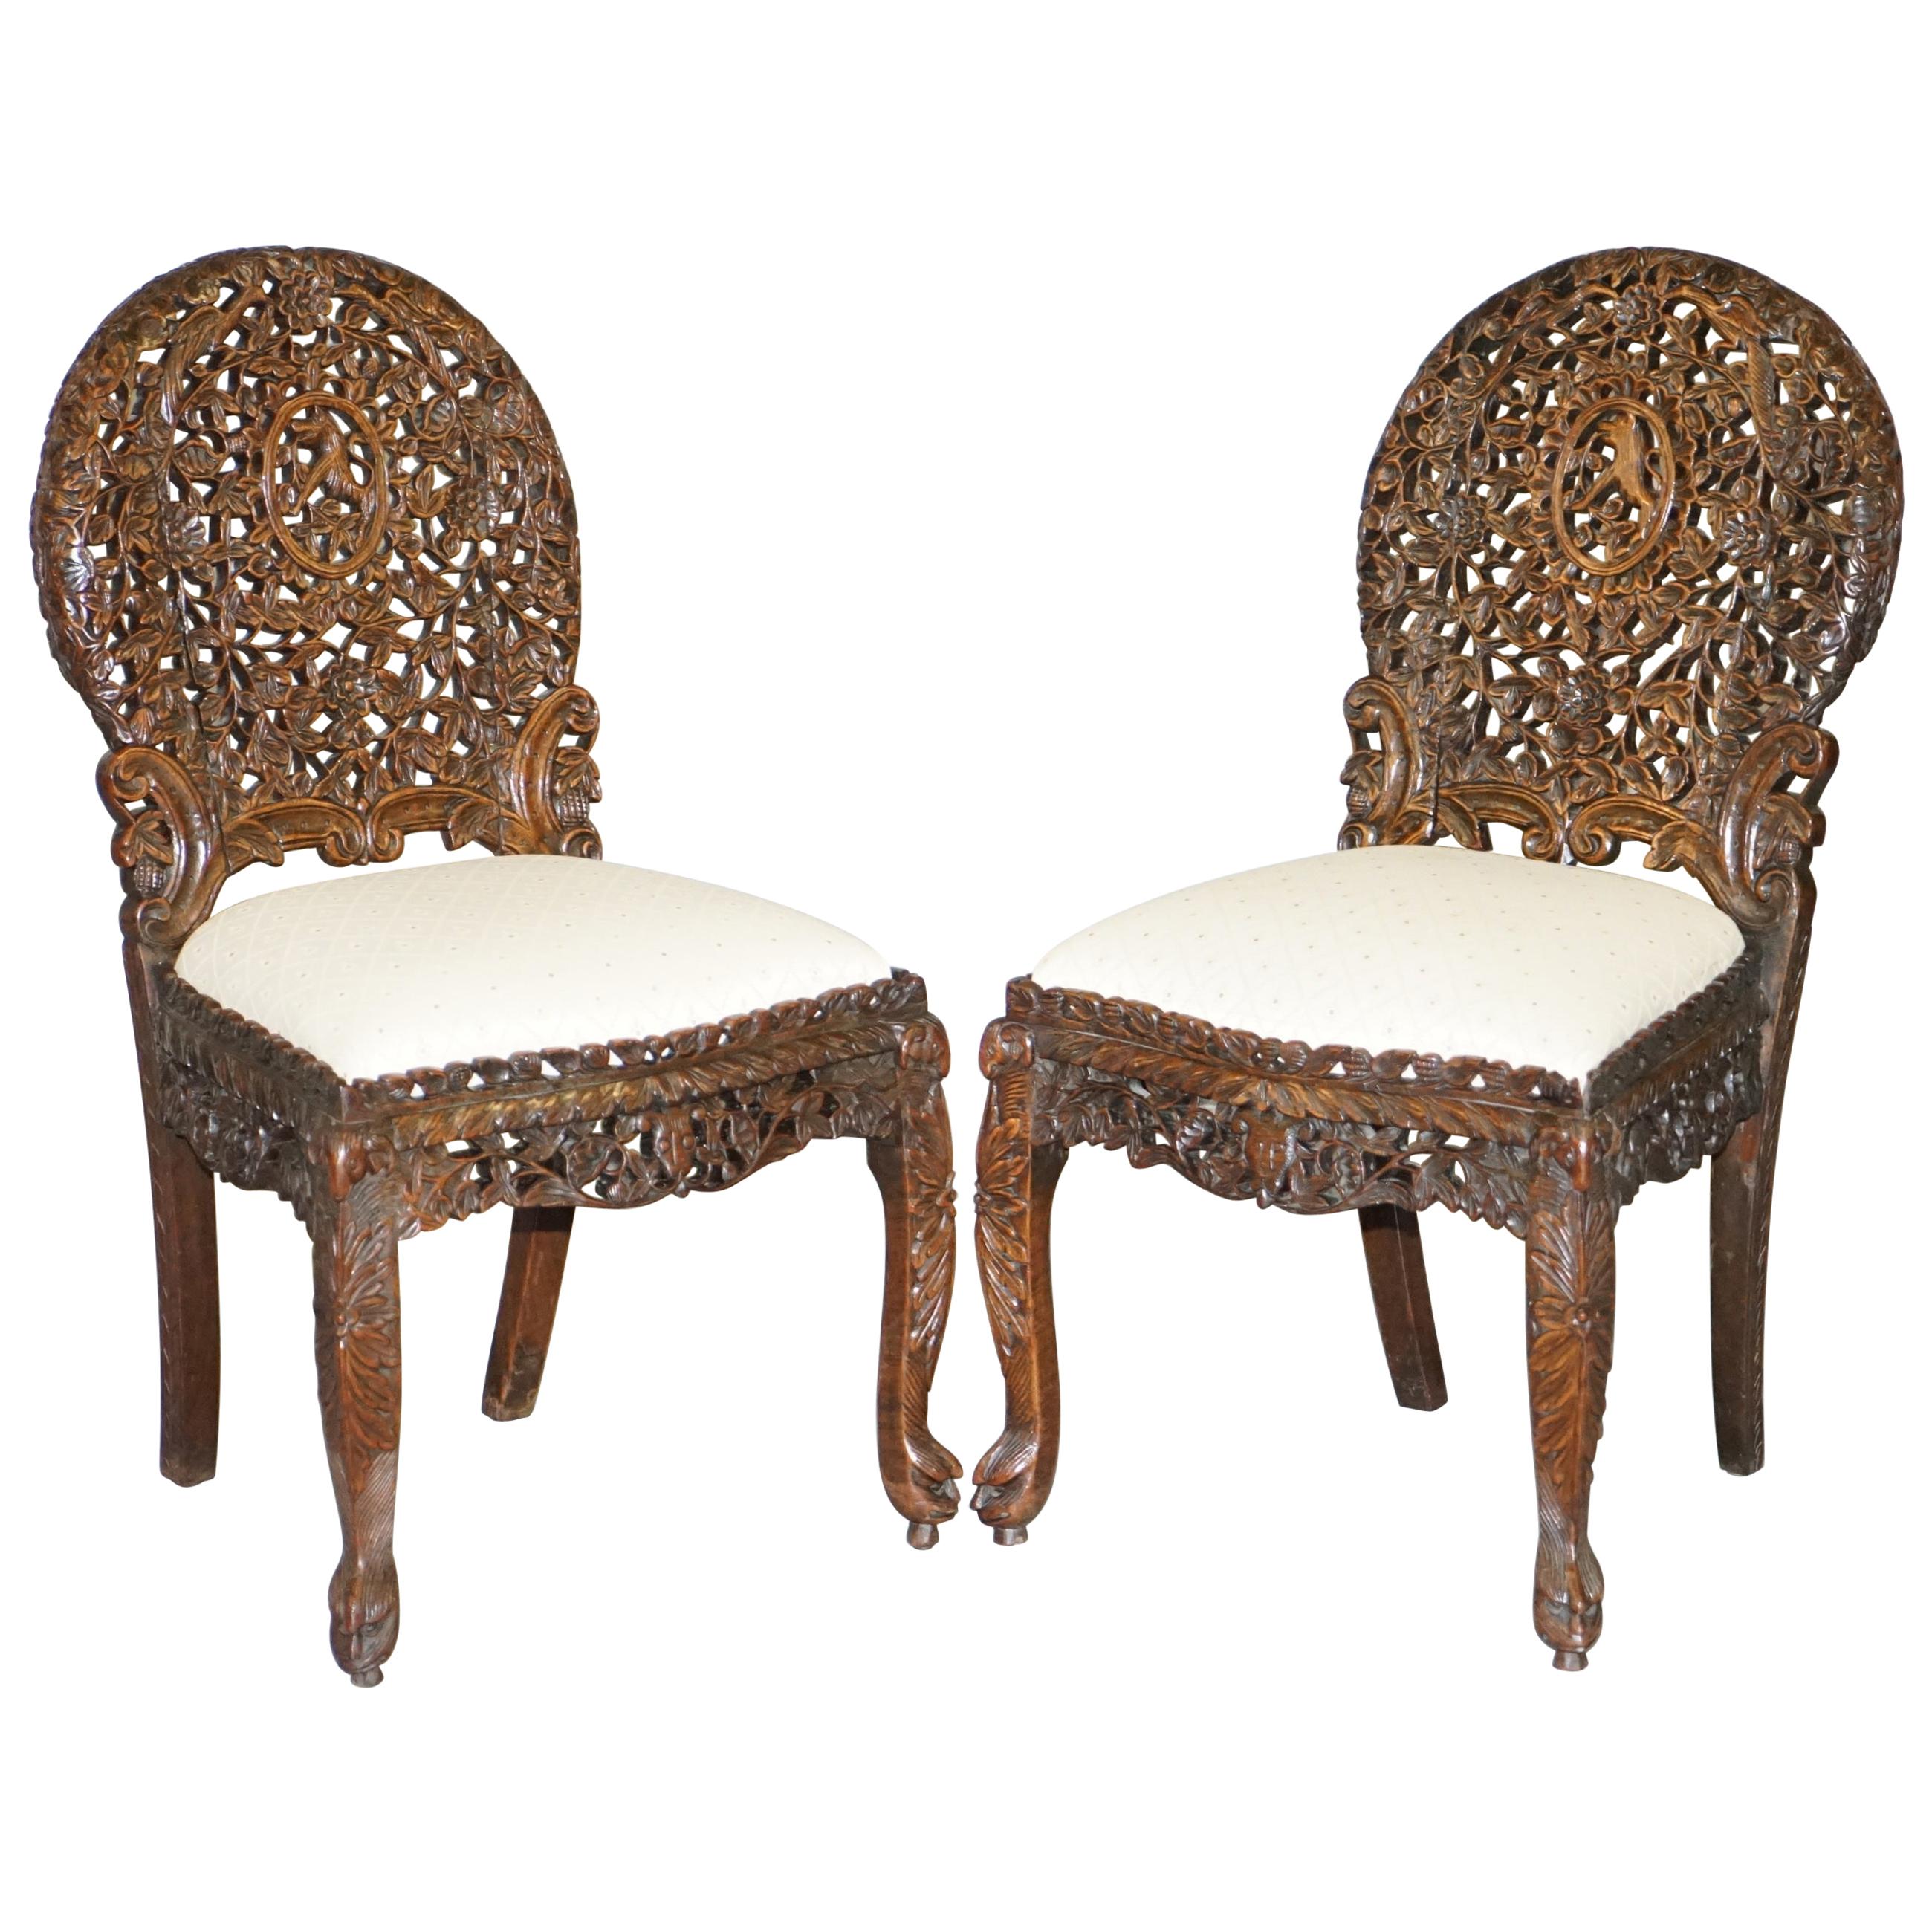 Pair of Hardwood Hand Carved Anglo Indian Burmese Chairs with Floral Detailing